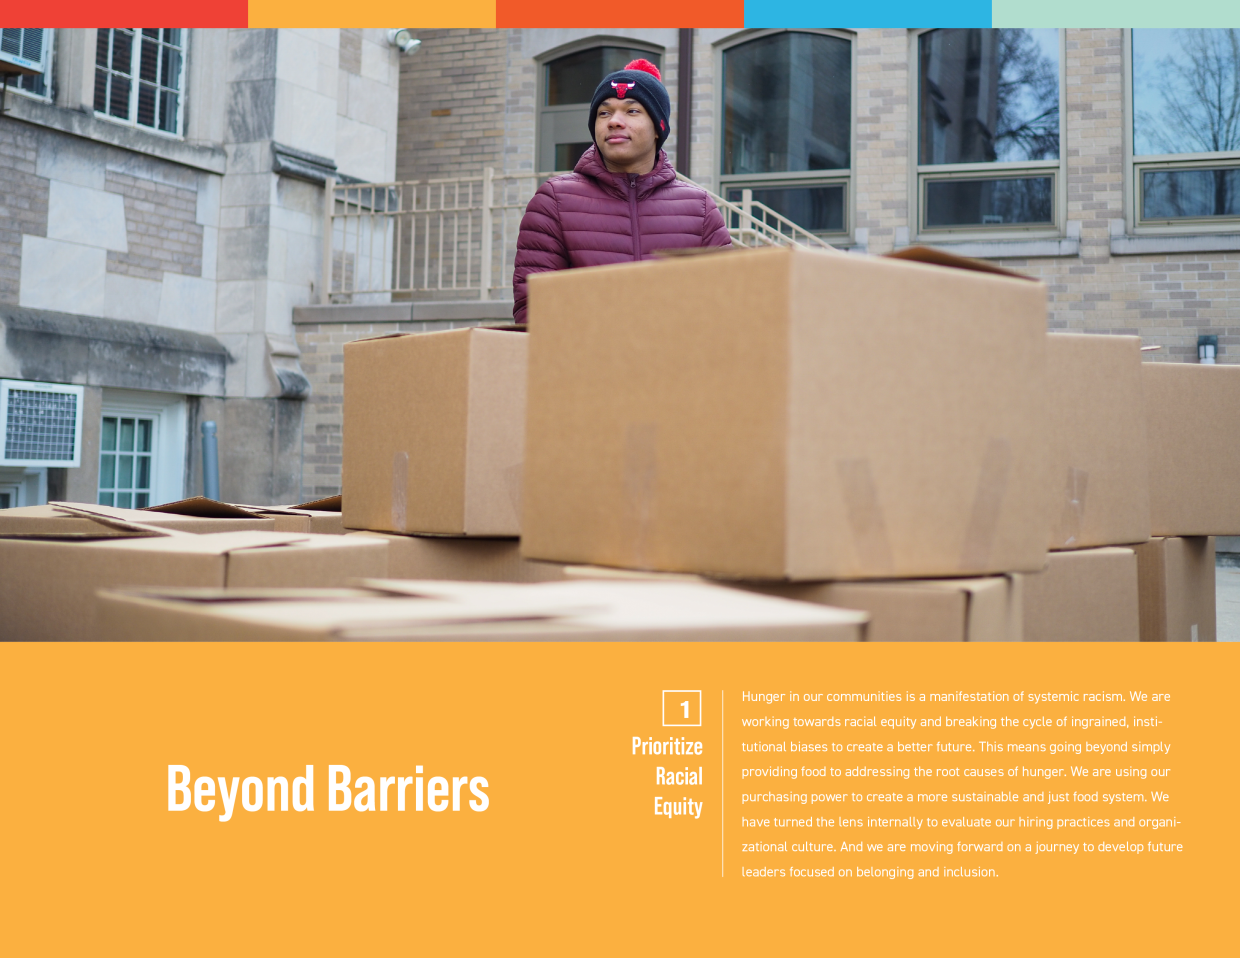 Beyond Barriers: Prioritizing Racial Equity